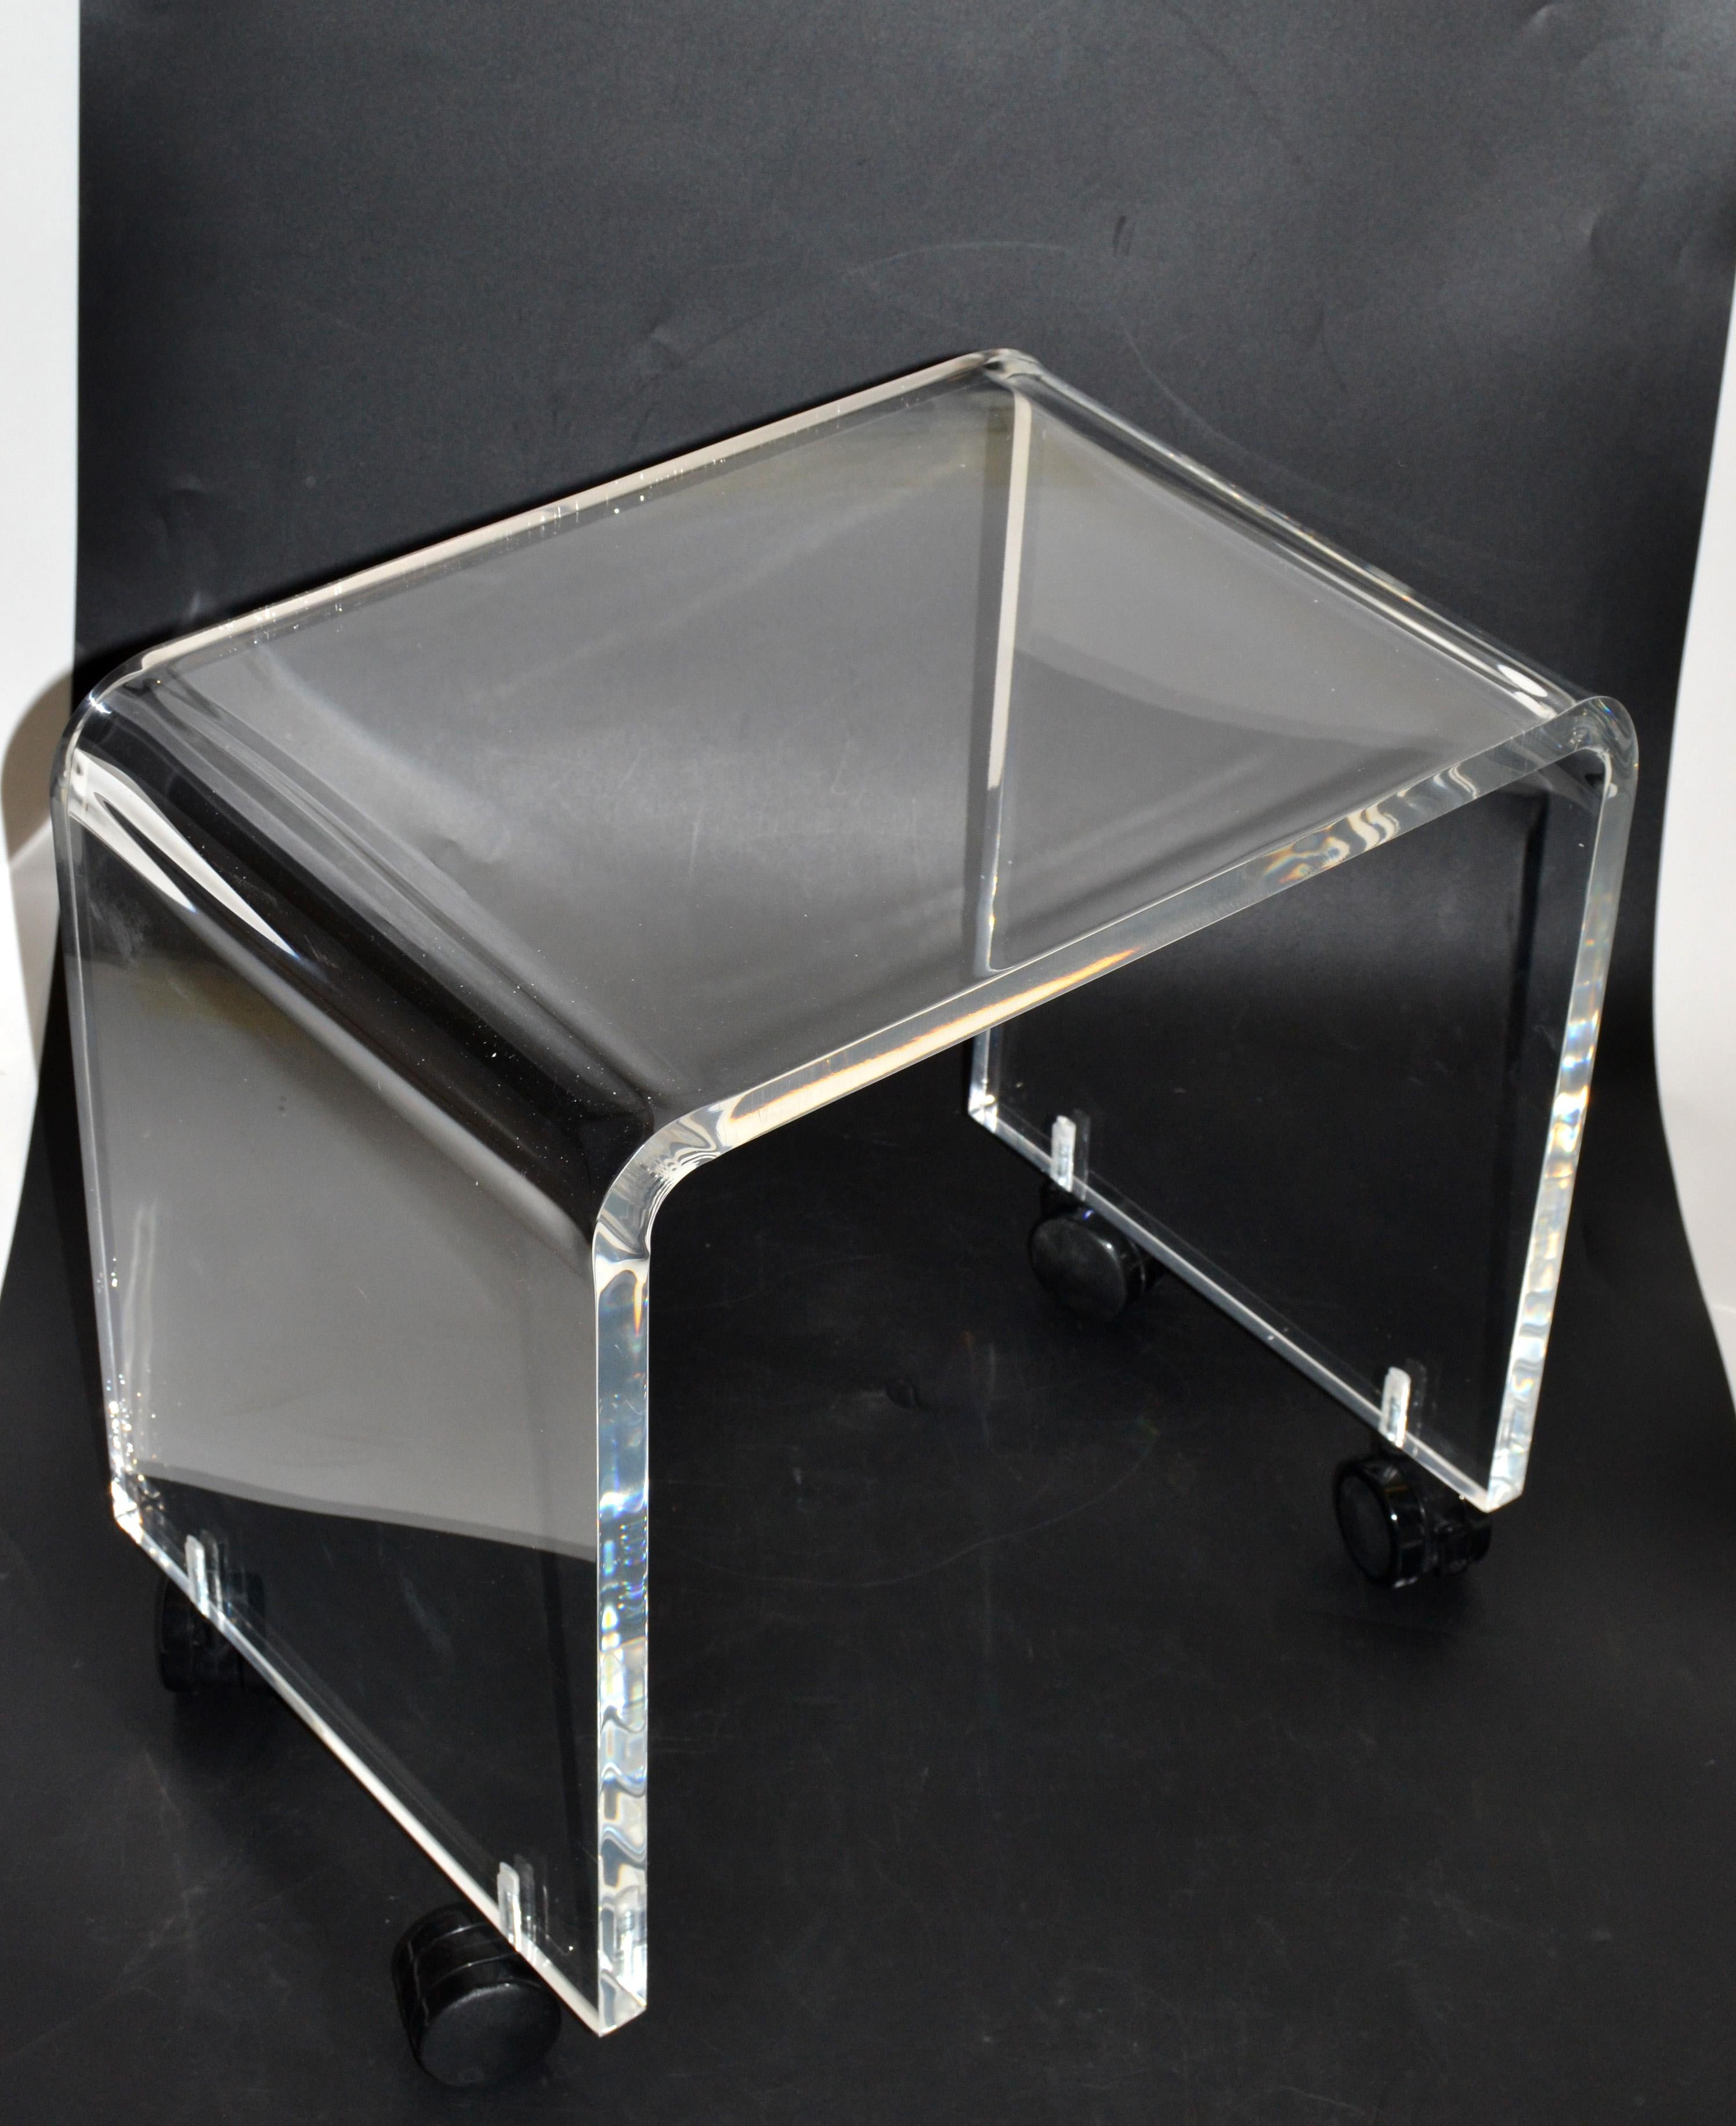 Mid-Century Modern Lucite stool on black casters.
This stool can be used as a footstool, vanity stool or a place to put your magazine.
The stool is firm and sturdy, ready for a new home.
  